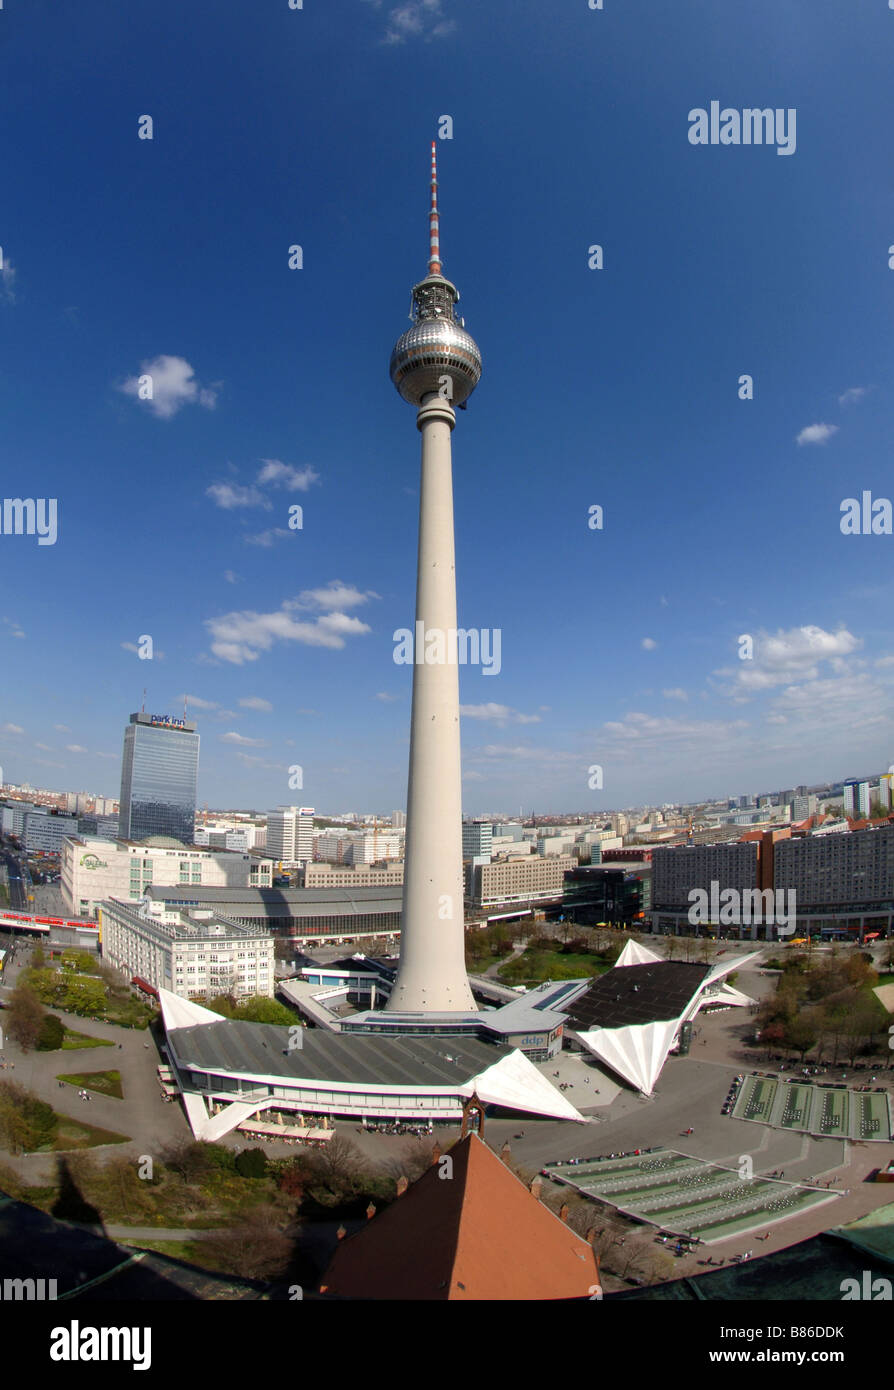 television tower alexander platz berlin germany view from st. marien church Stock Photo